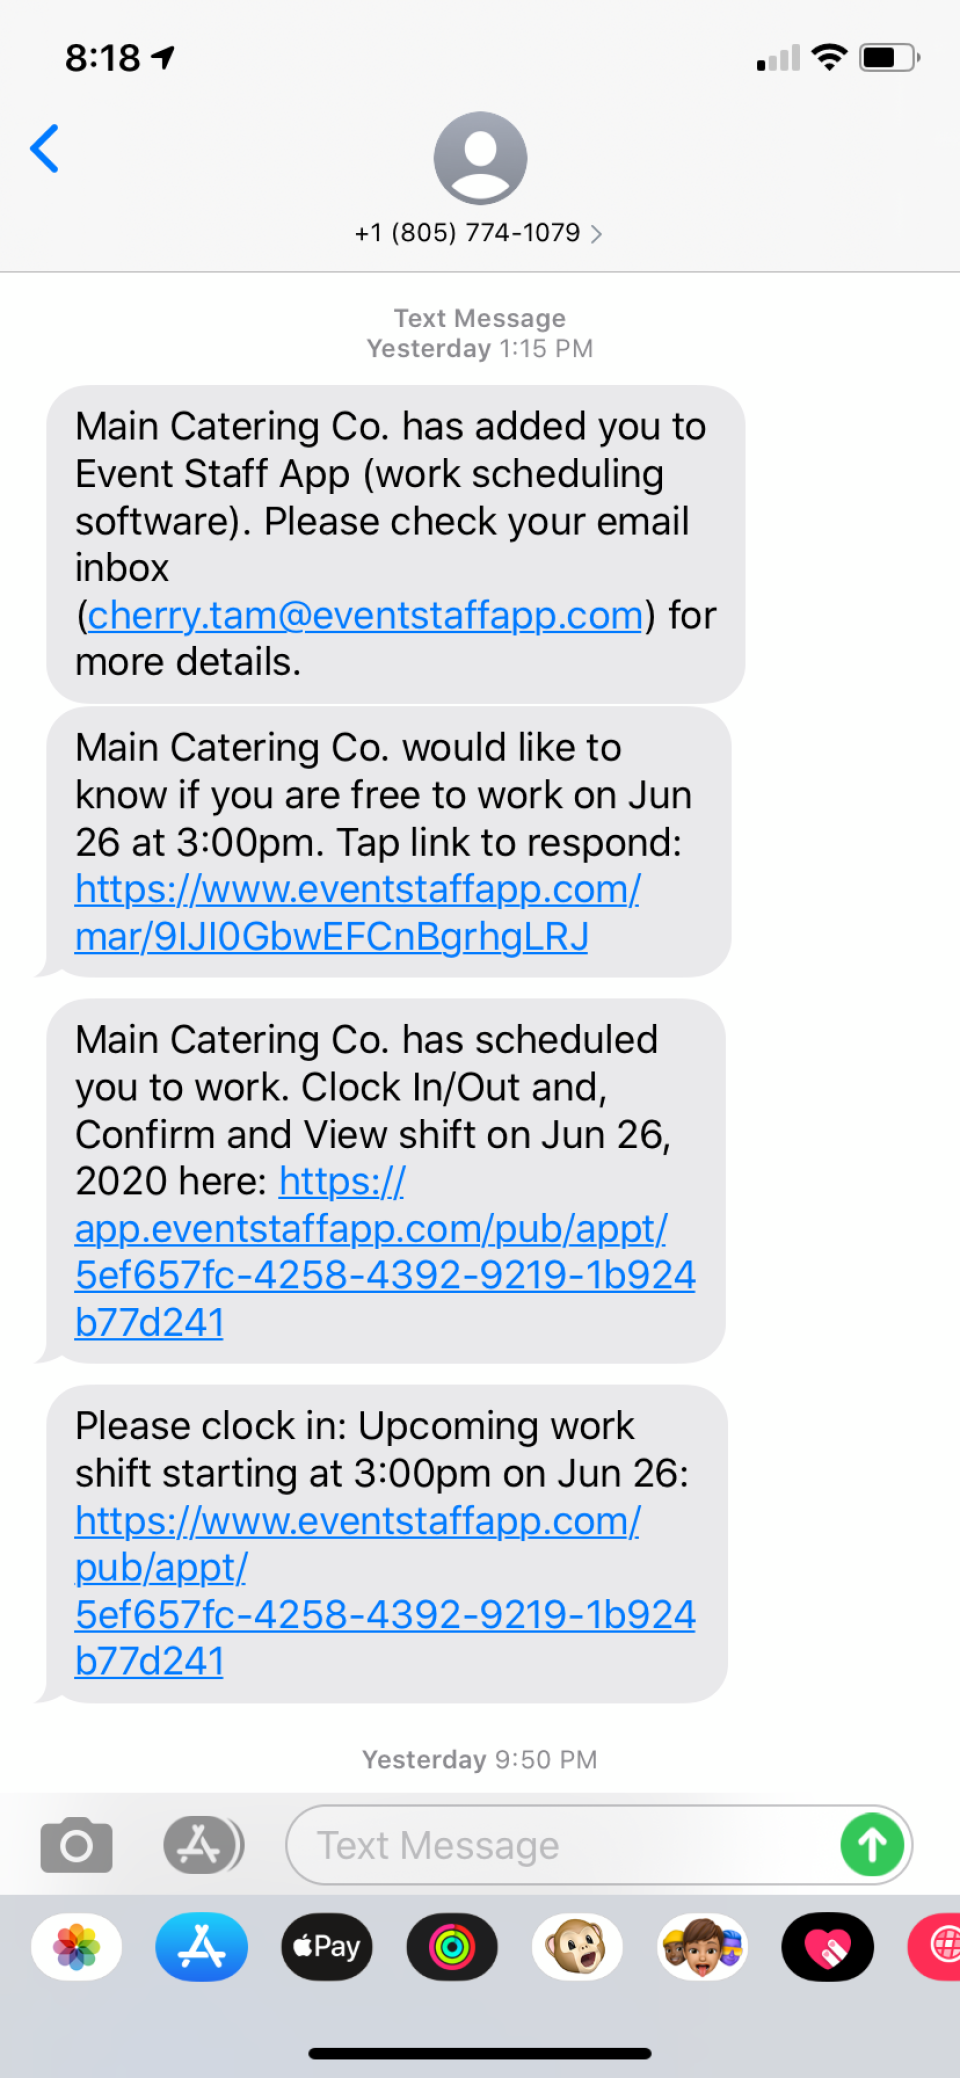 Event Staff App Software - Automated text messages sent from the system so that you don't have to spend time texting your staff.